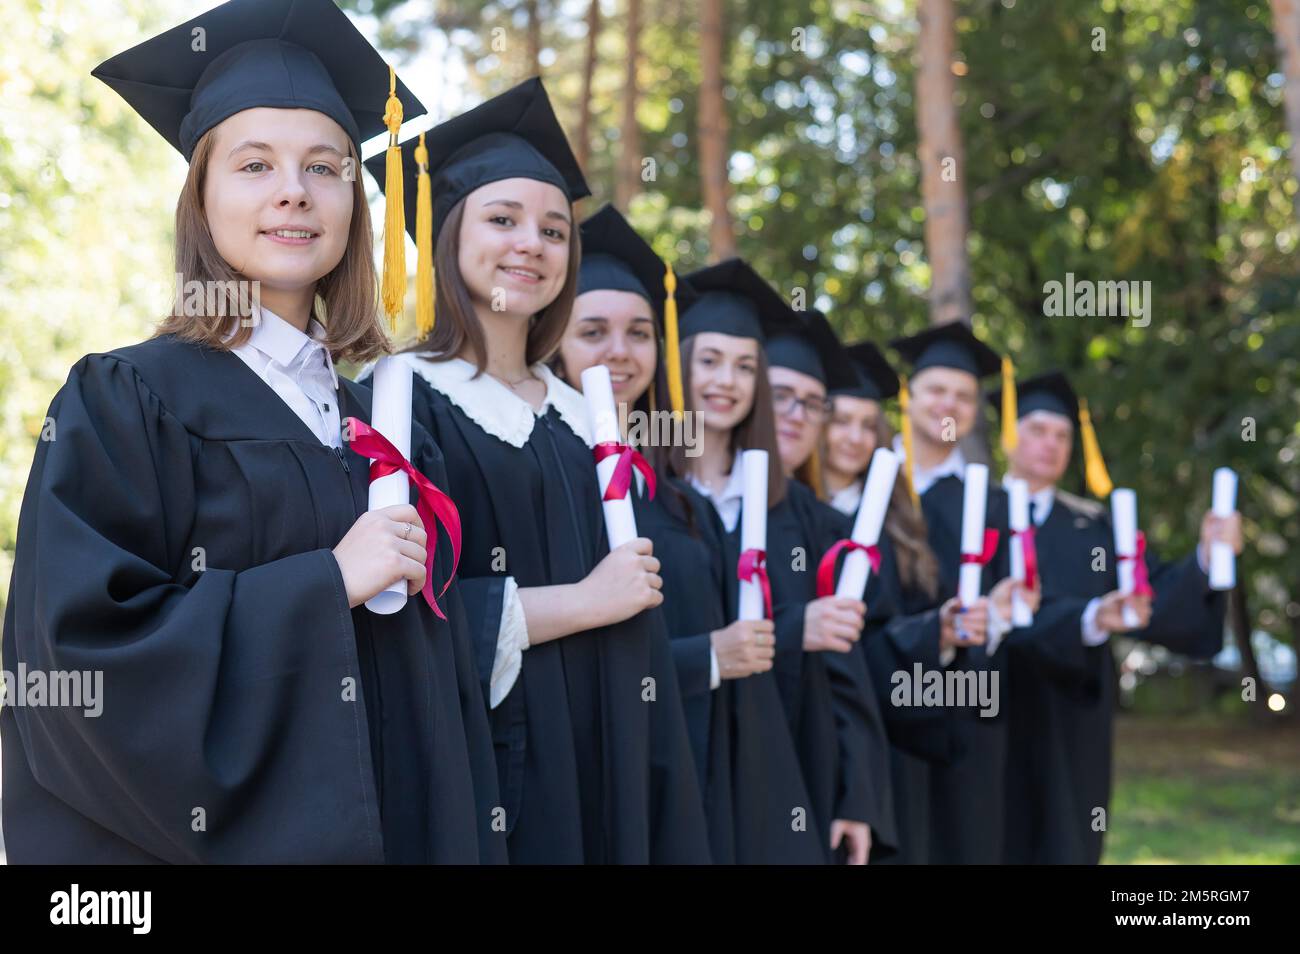 Row of young people in graduation gowns outdoors. Age student. Stock Photo